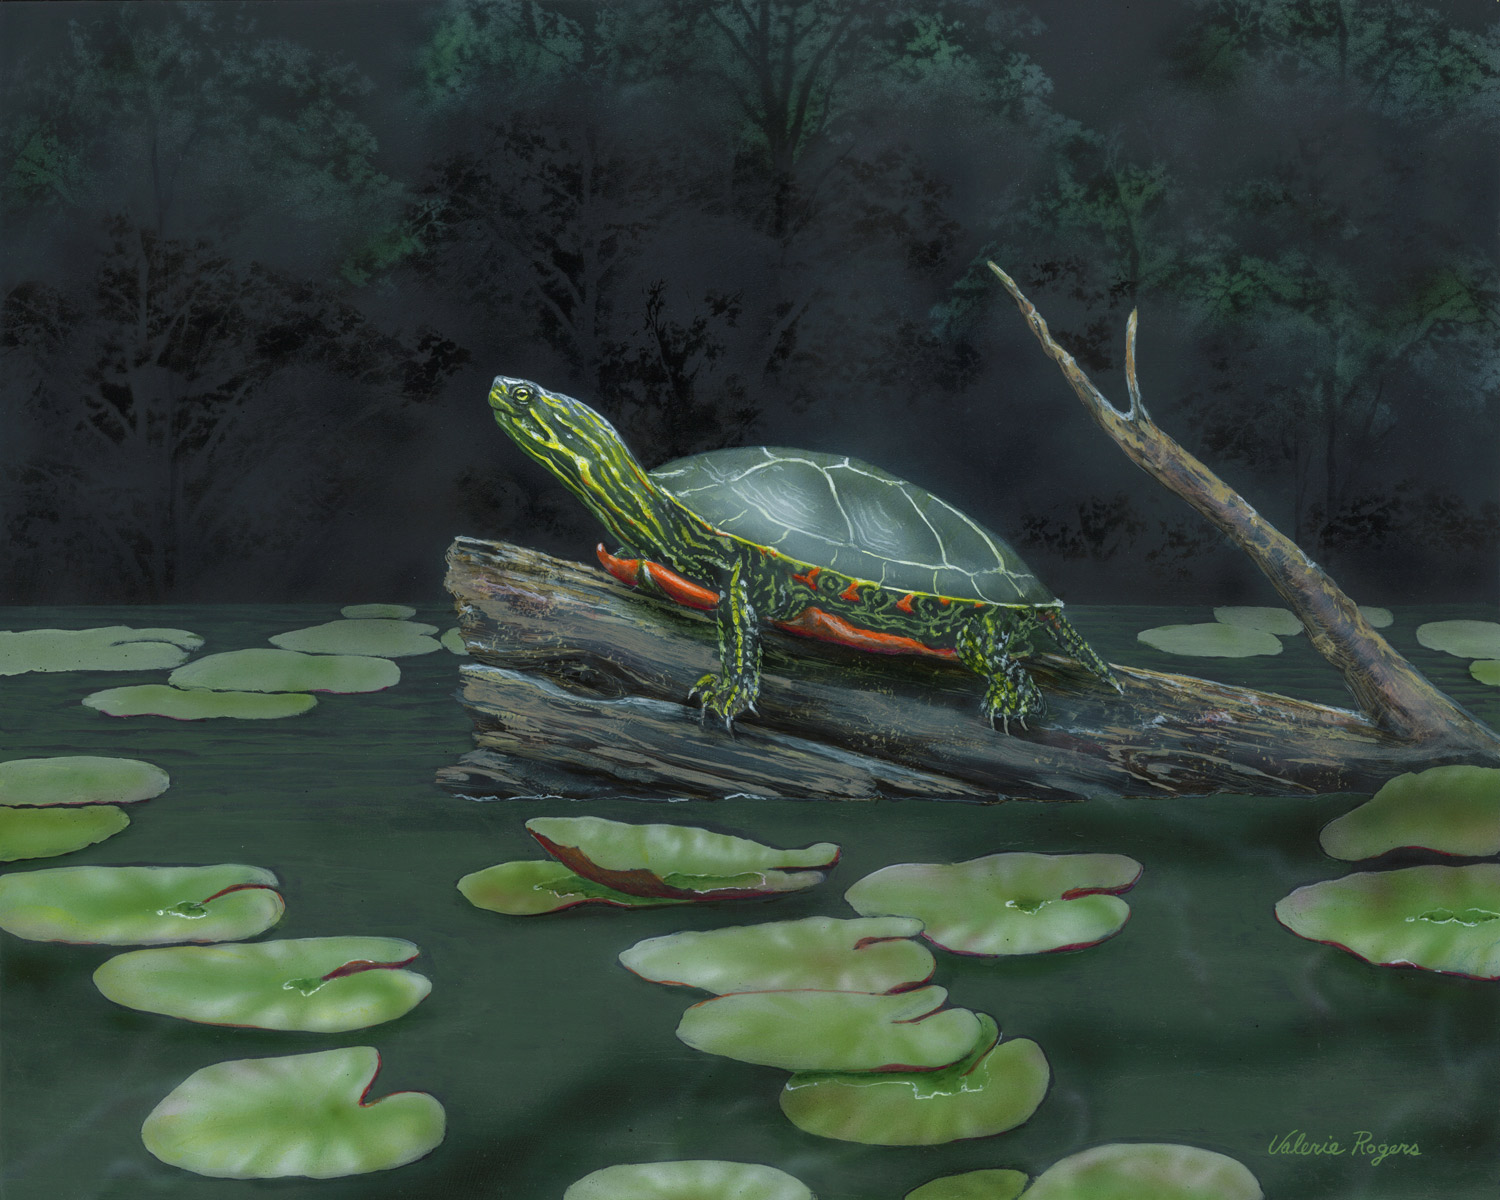 First Light is a turtle painting by Valerie Rogers